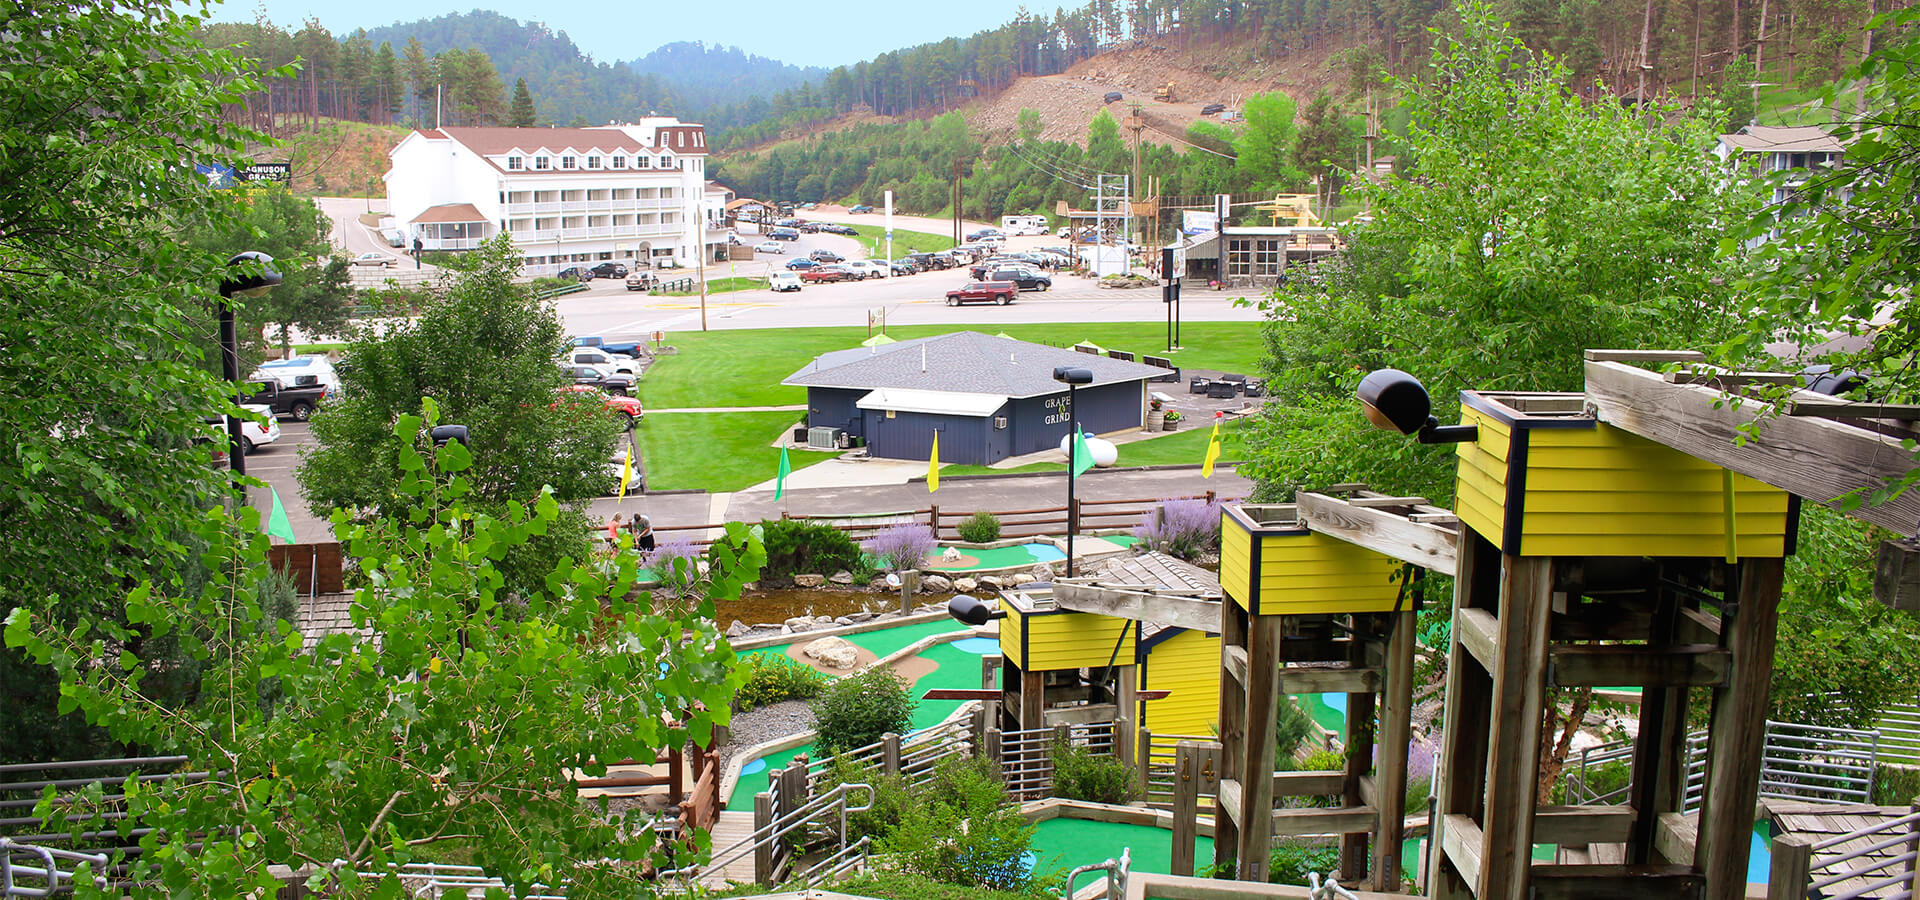 Forth slideExterior photo overlooking Holy Terror Mini Gold and Grapes and Grinds in Keystone, SD.